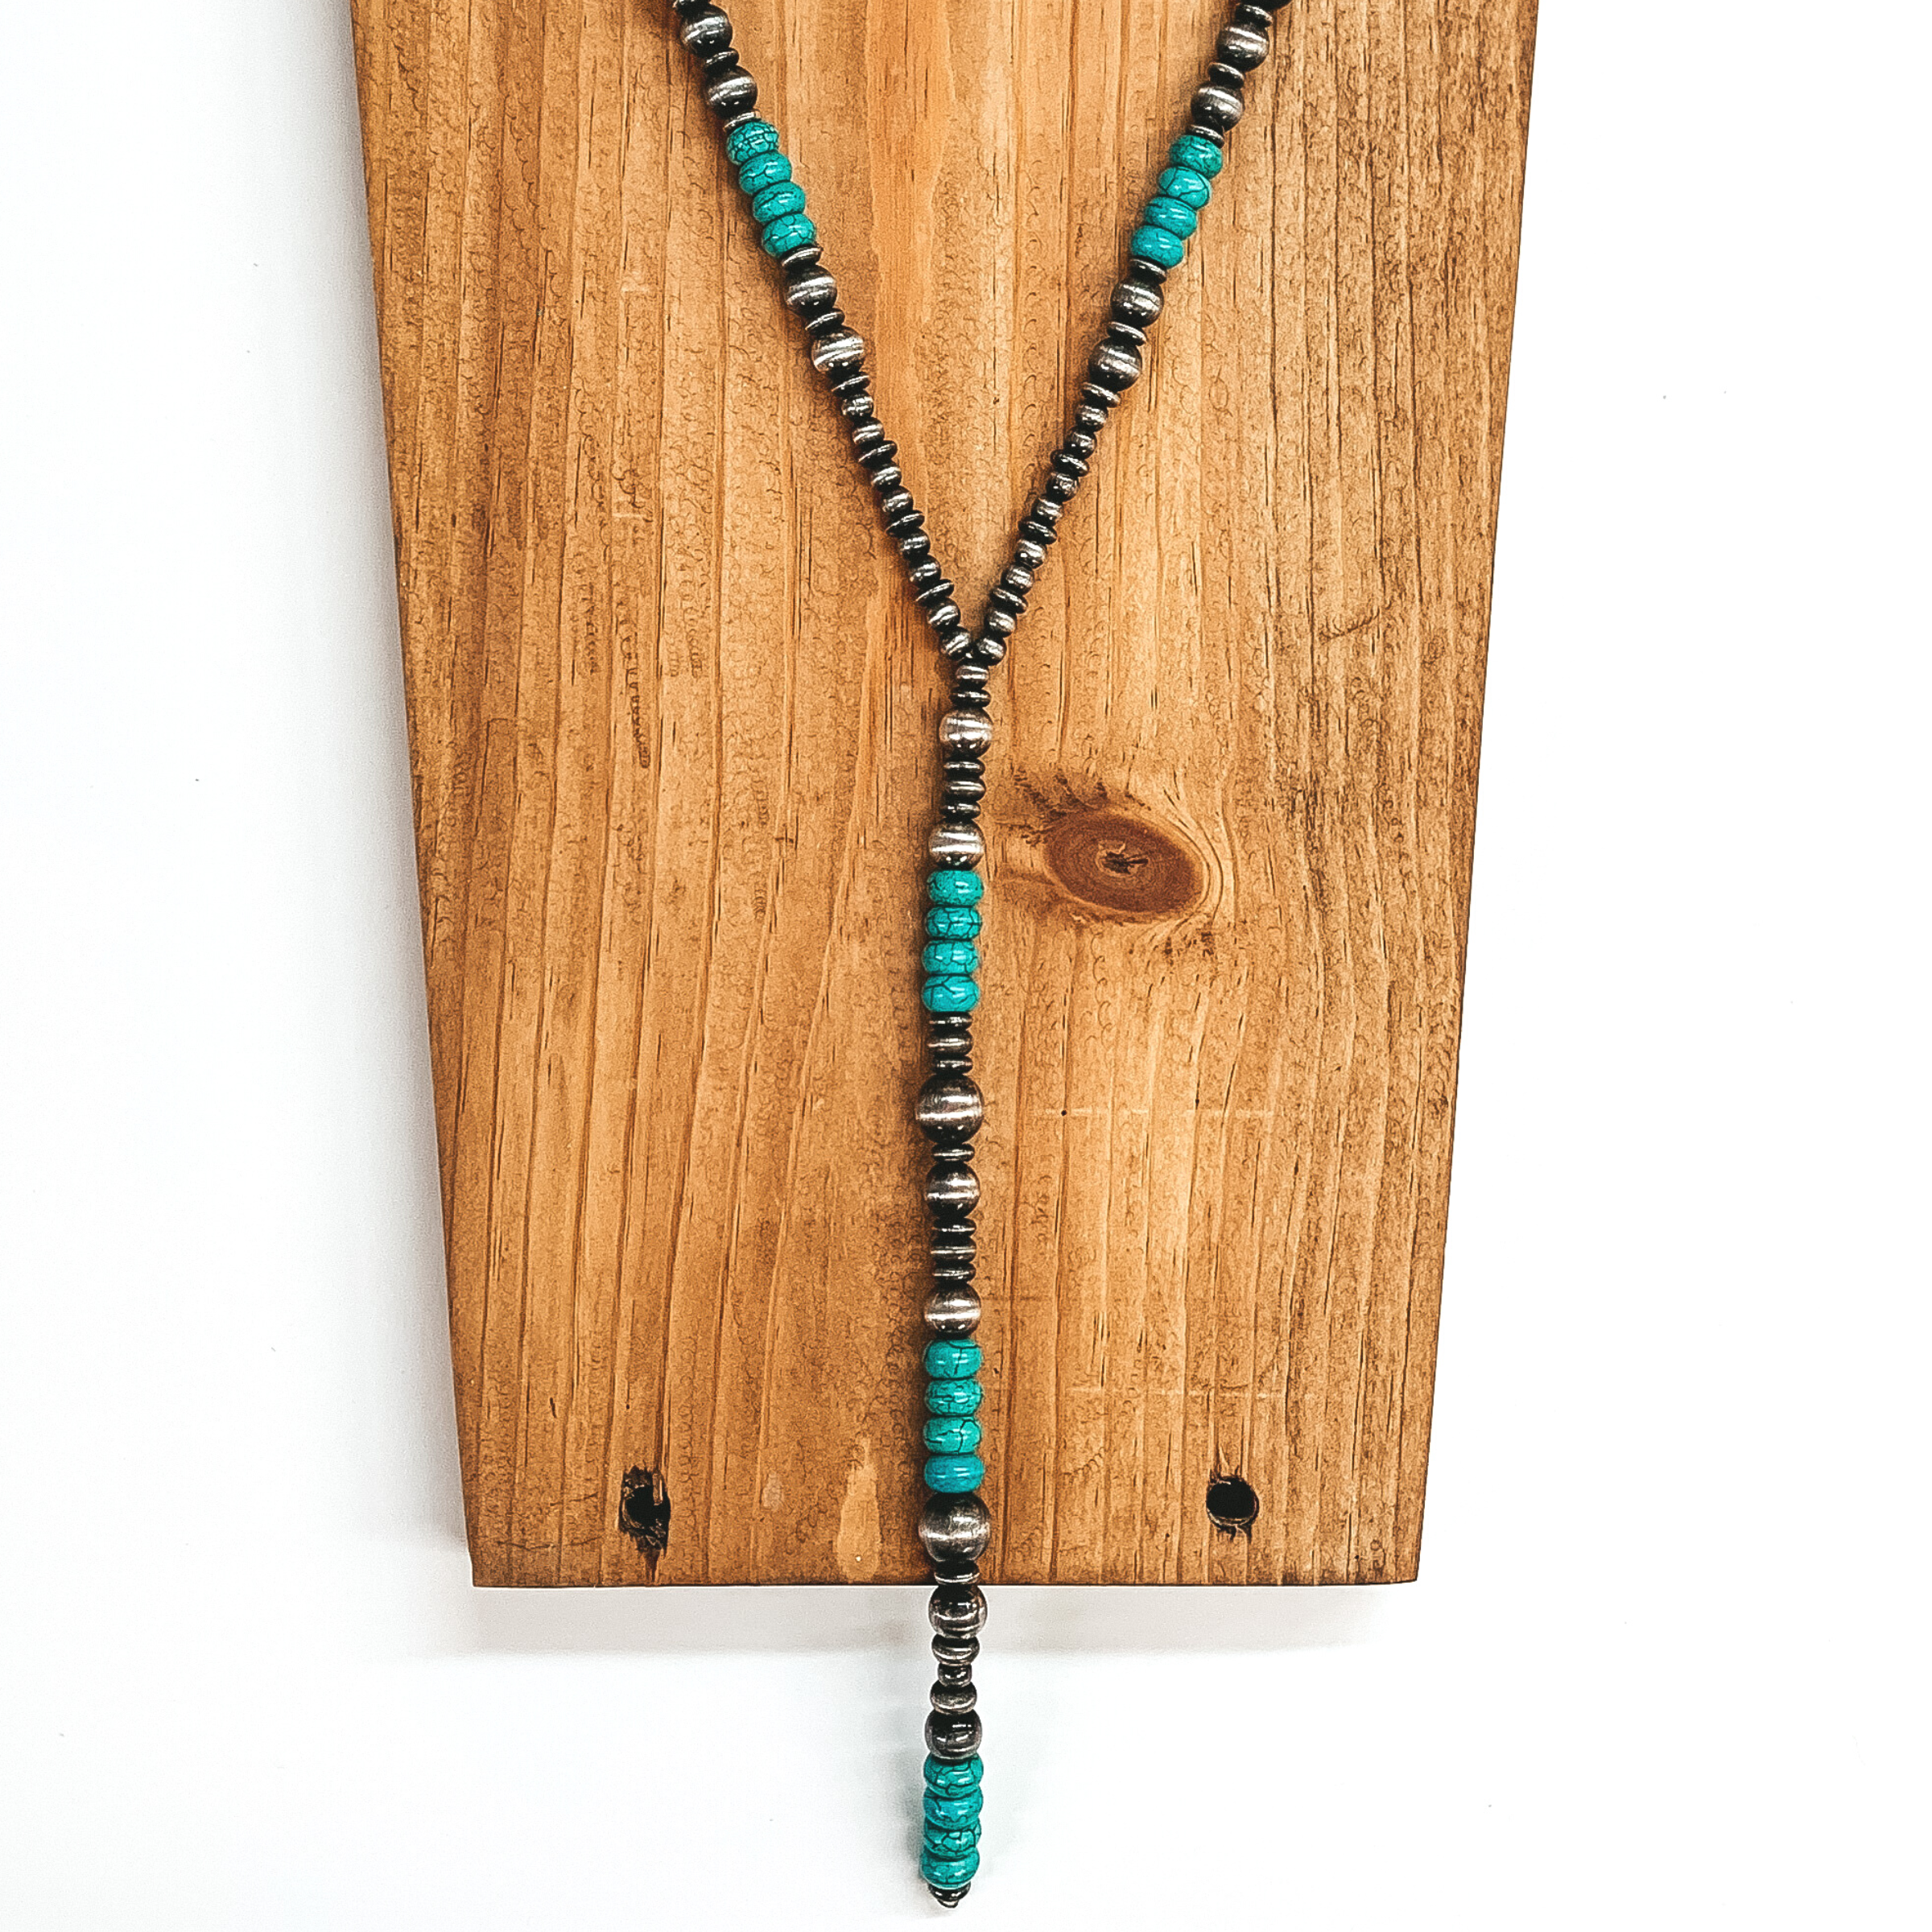 Faux Navajo Pearl Lariat Necklace in Silver Tone with Turquoise Beads - Giddy Up Glamour Boutique